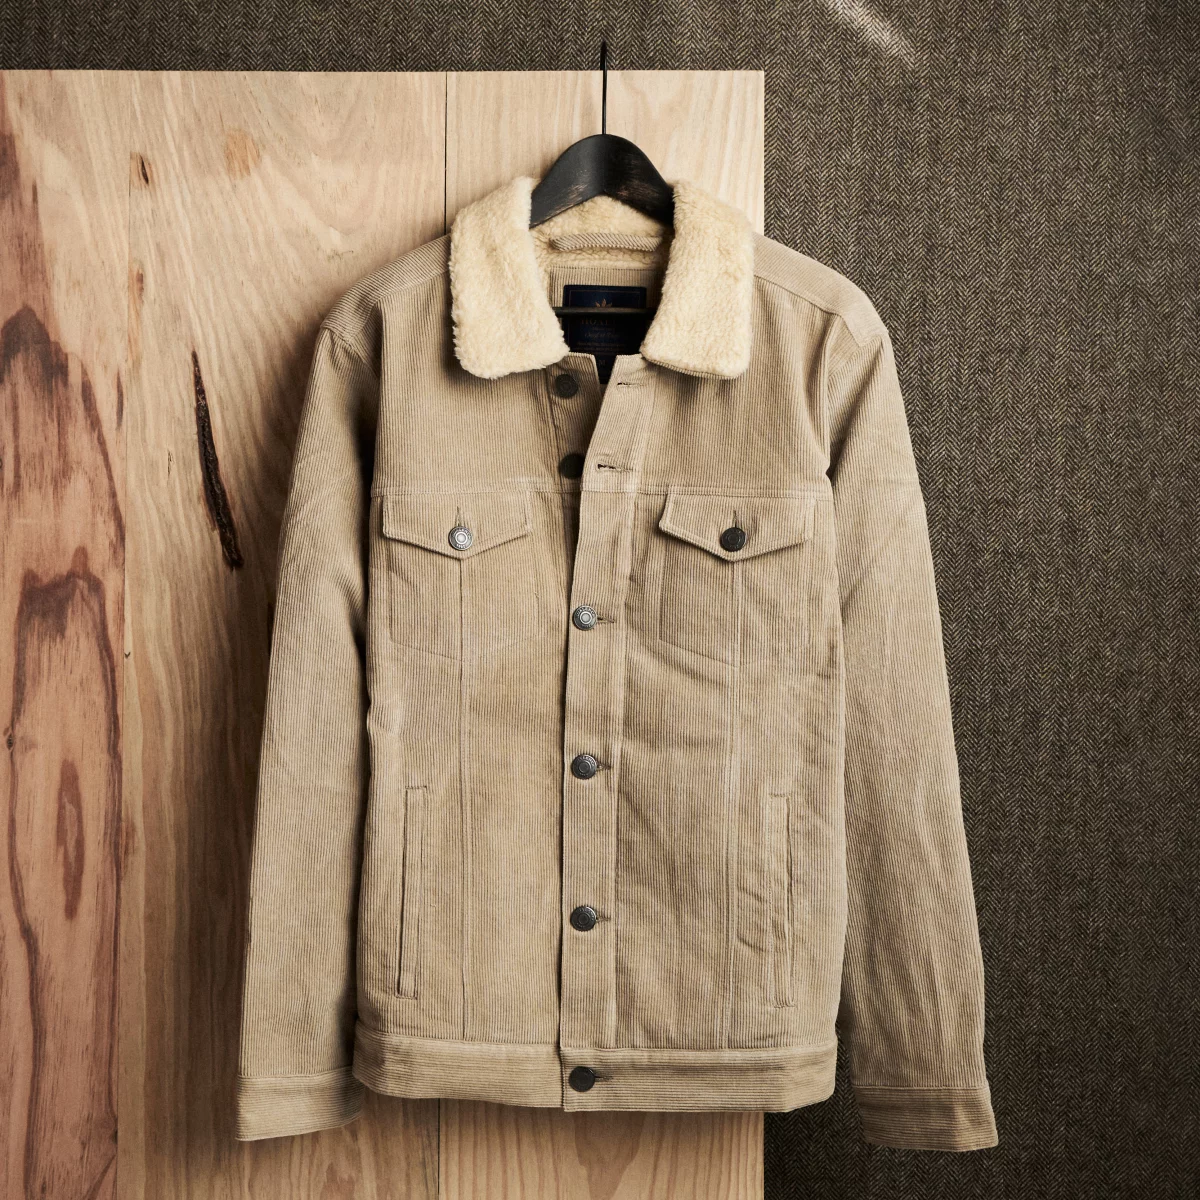 Jacket Insulated lined corduroy